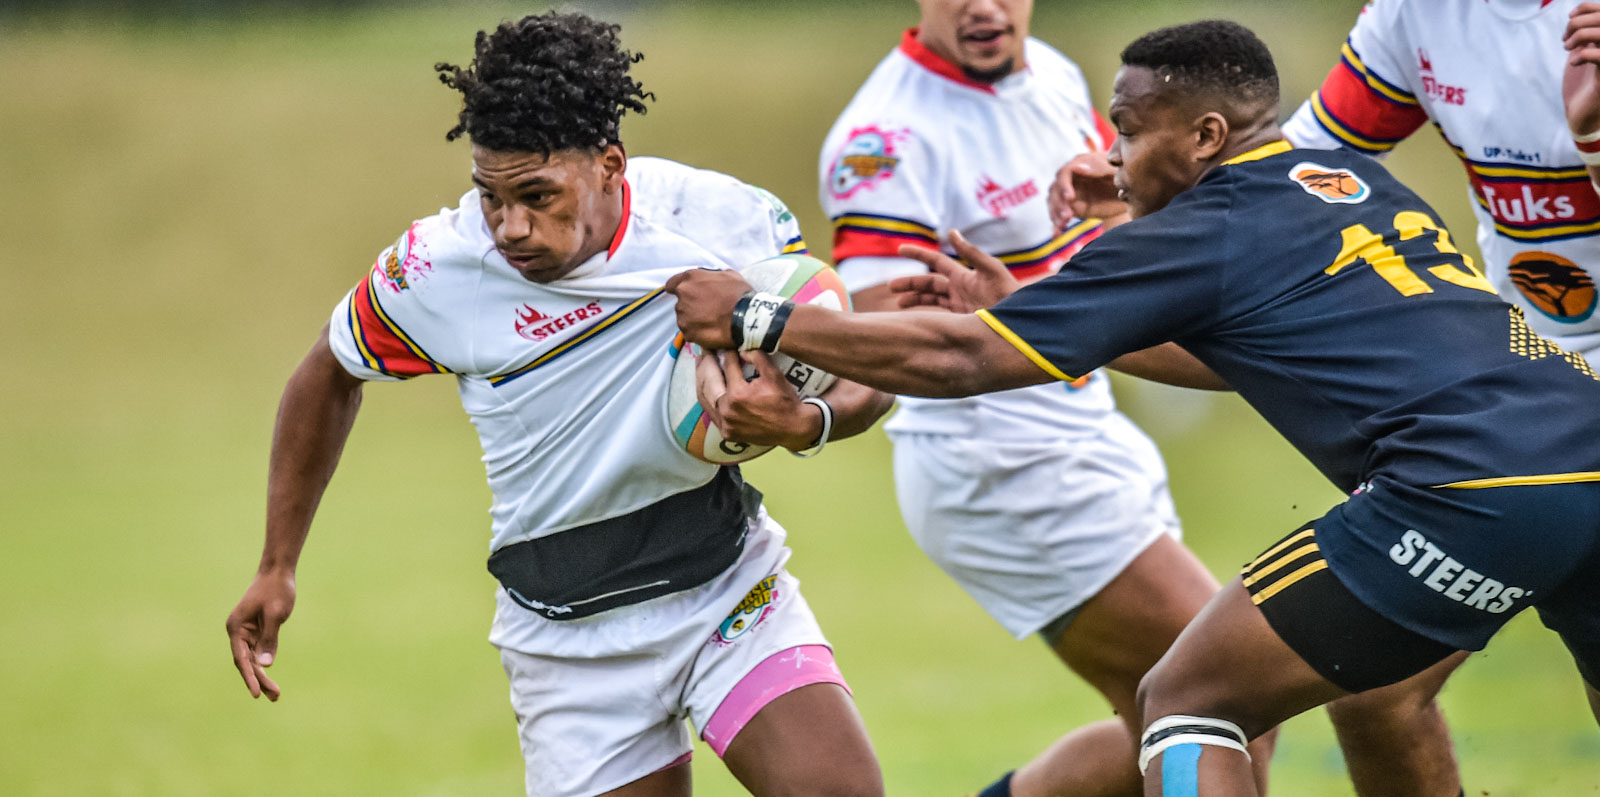 Tuks totally outclassed the Madibaz on Monday afternoon.